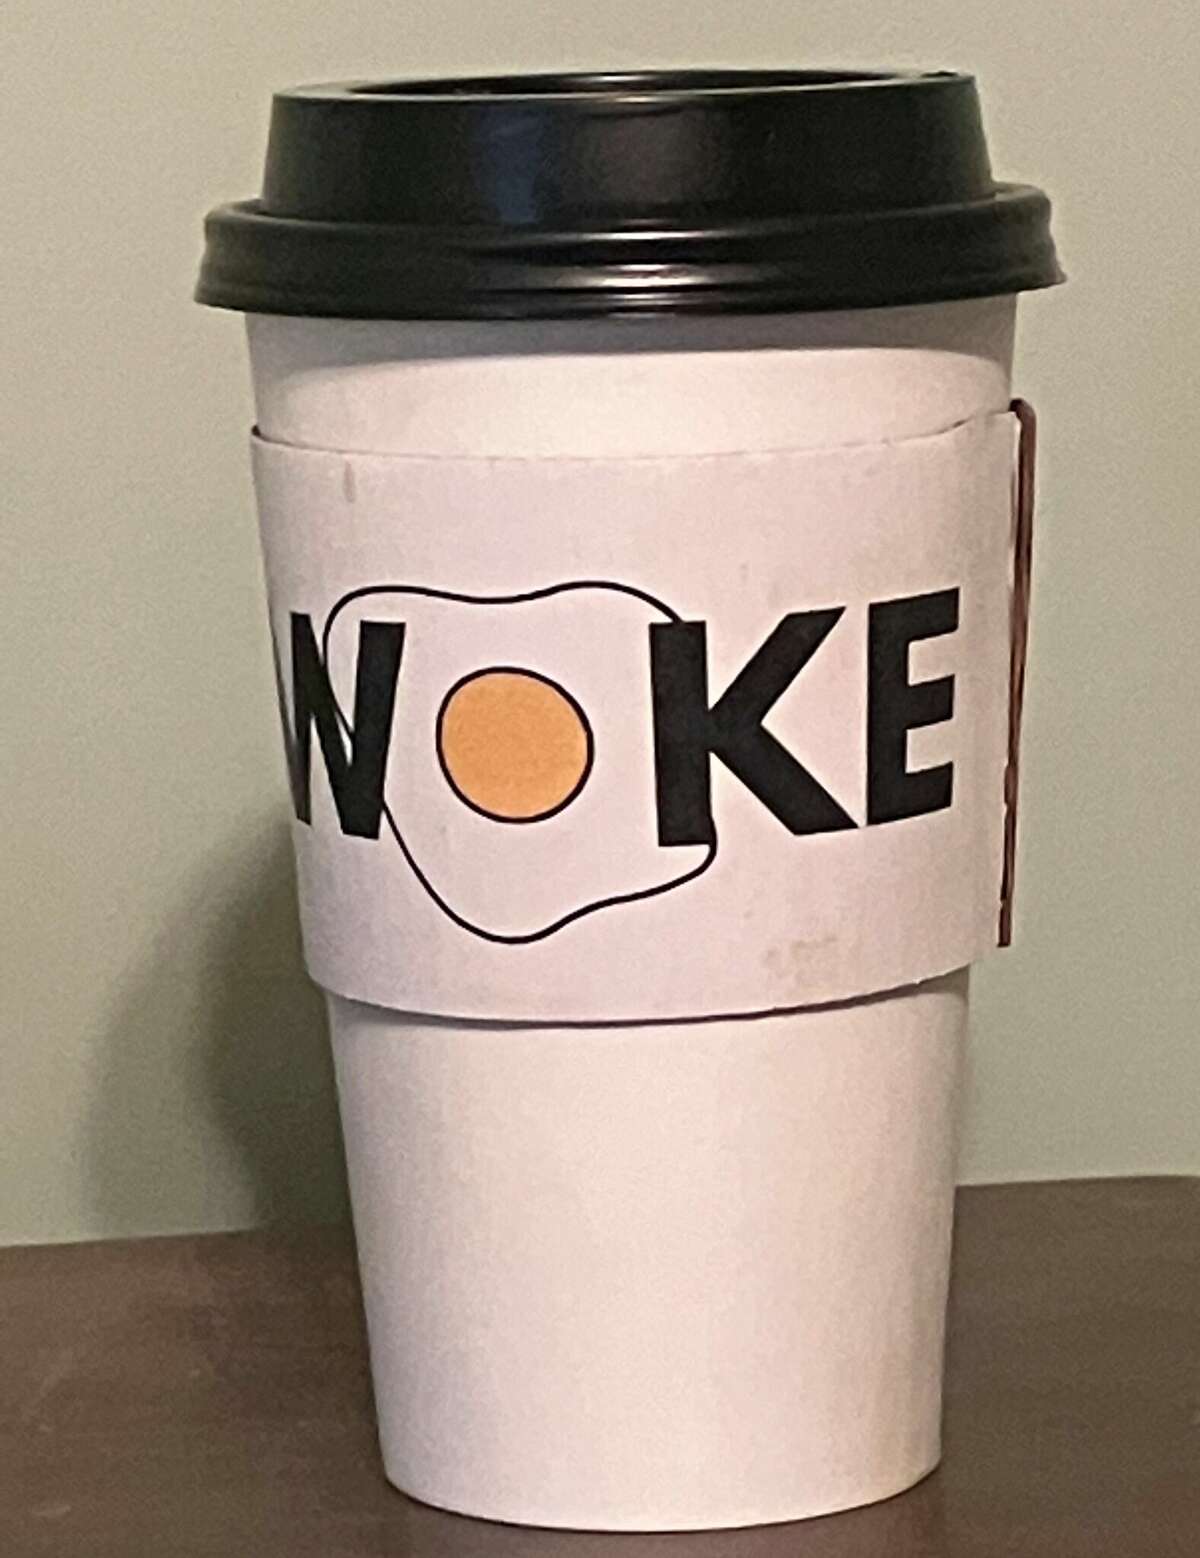 Woke Breakfast & Coffee owner Carmen Quiroga said she has spent thousands on signs and other items, including coffee sleeves with the restaurant logo, and is not changing the name.